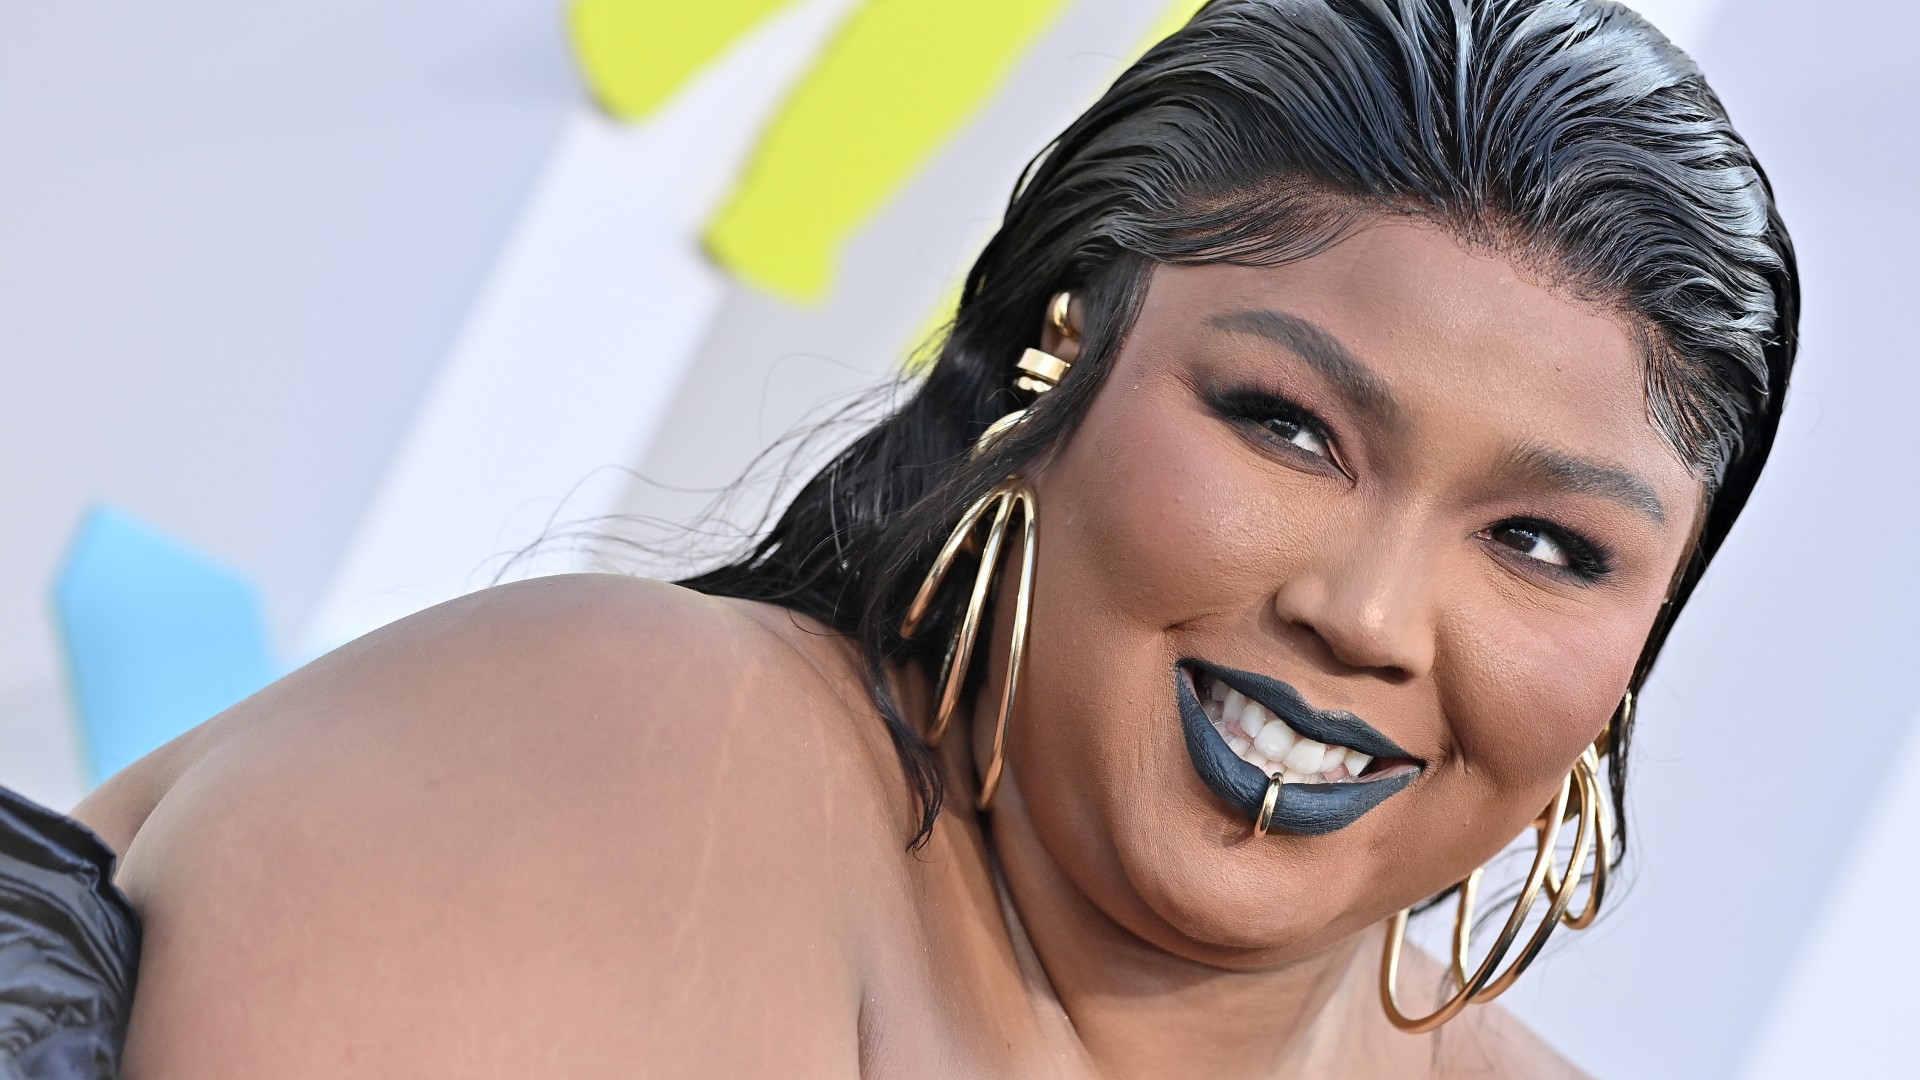 Lizzo's Brand Yitty to Launch Gender-Affirming Shapewear Line